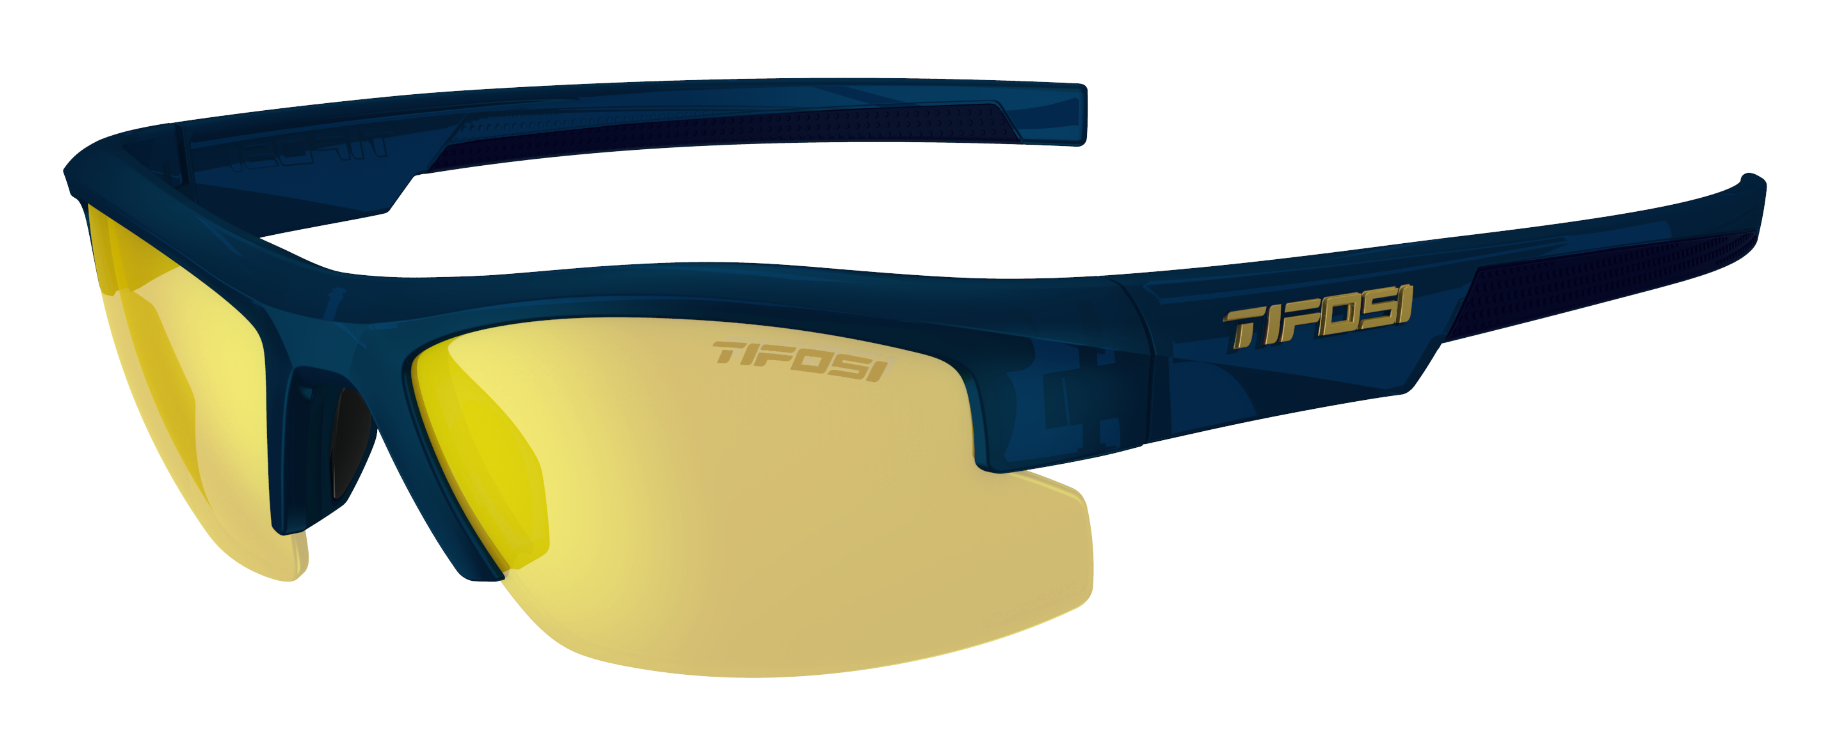 tifosi shutout sunglasses in gold and navy with yellow lenses